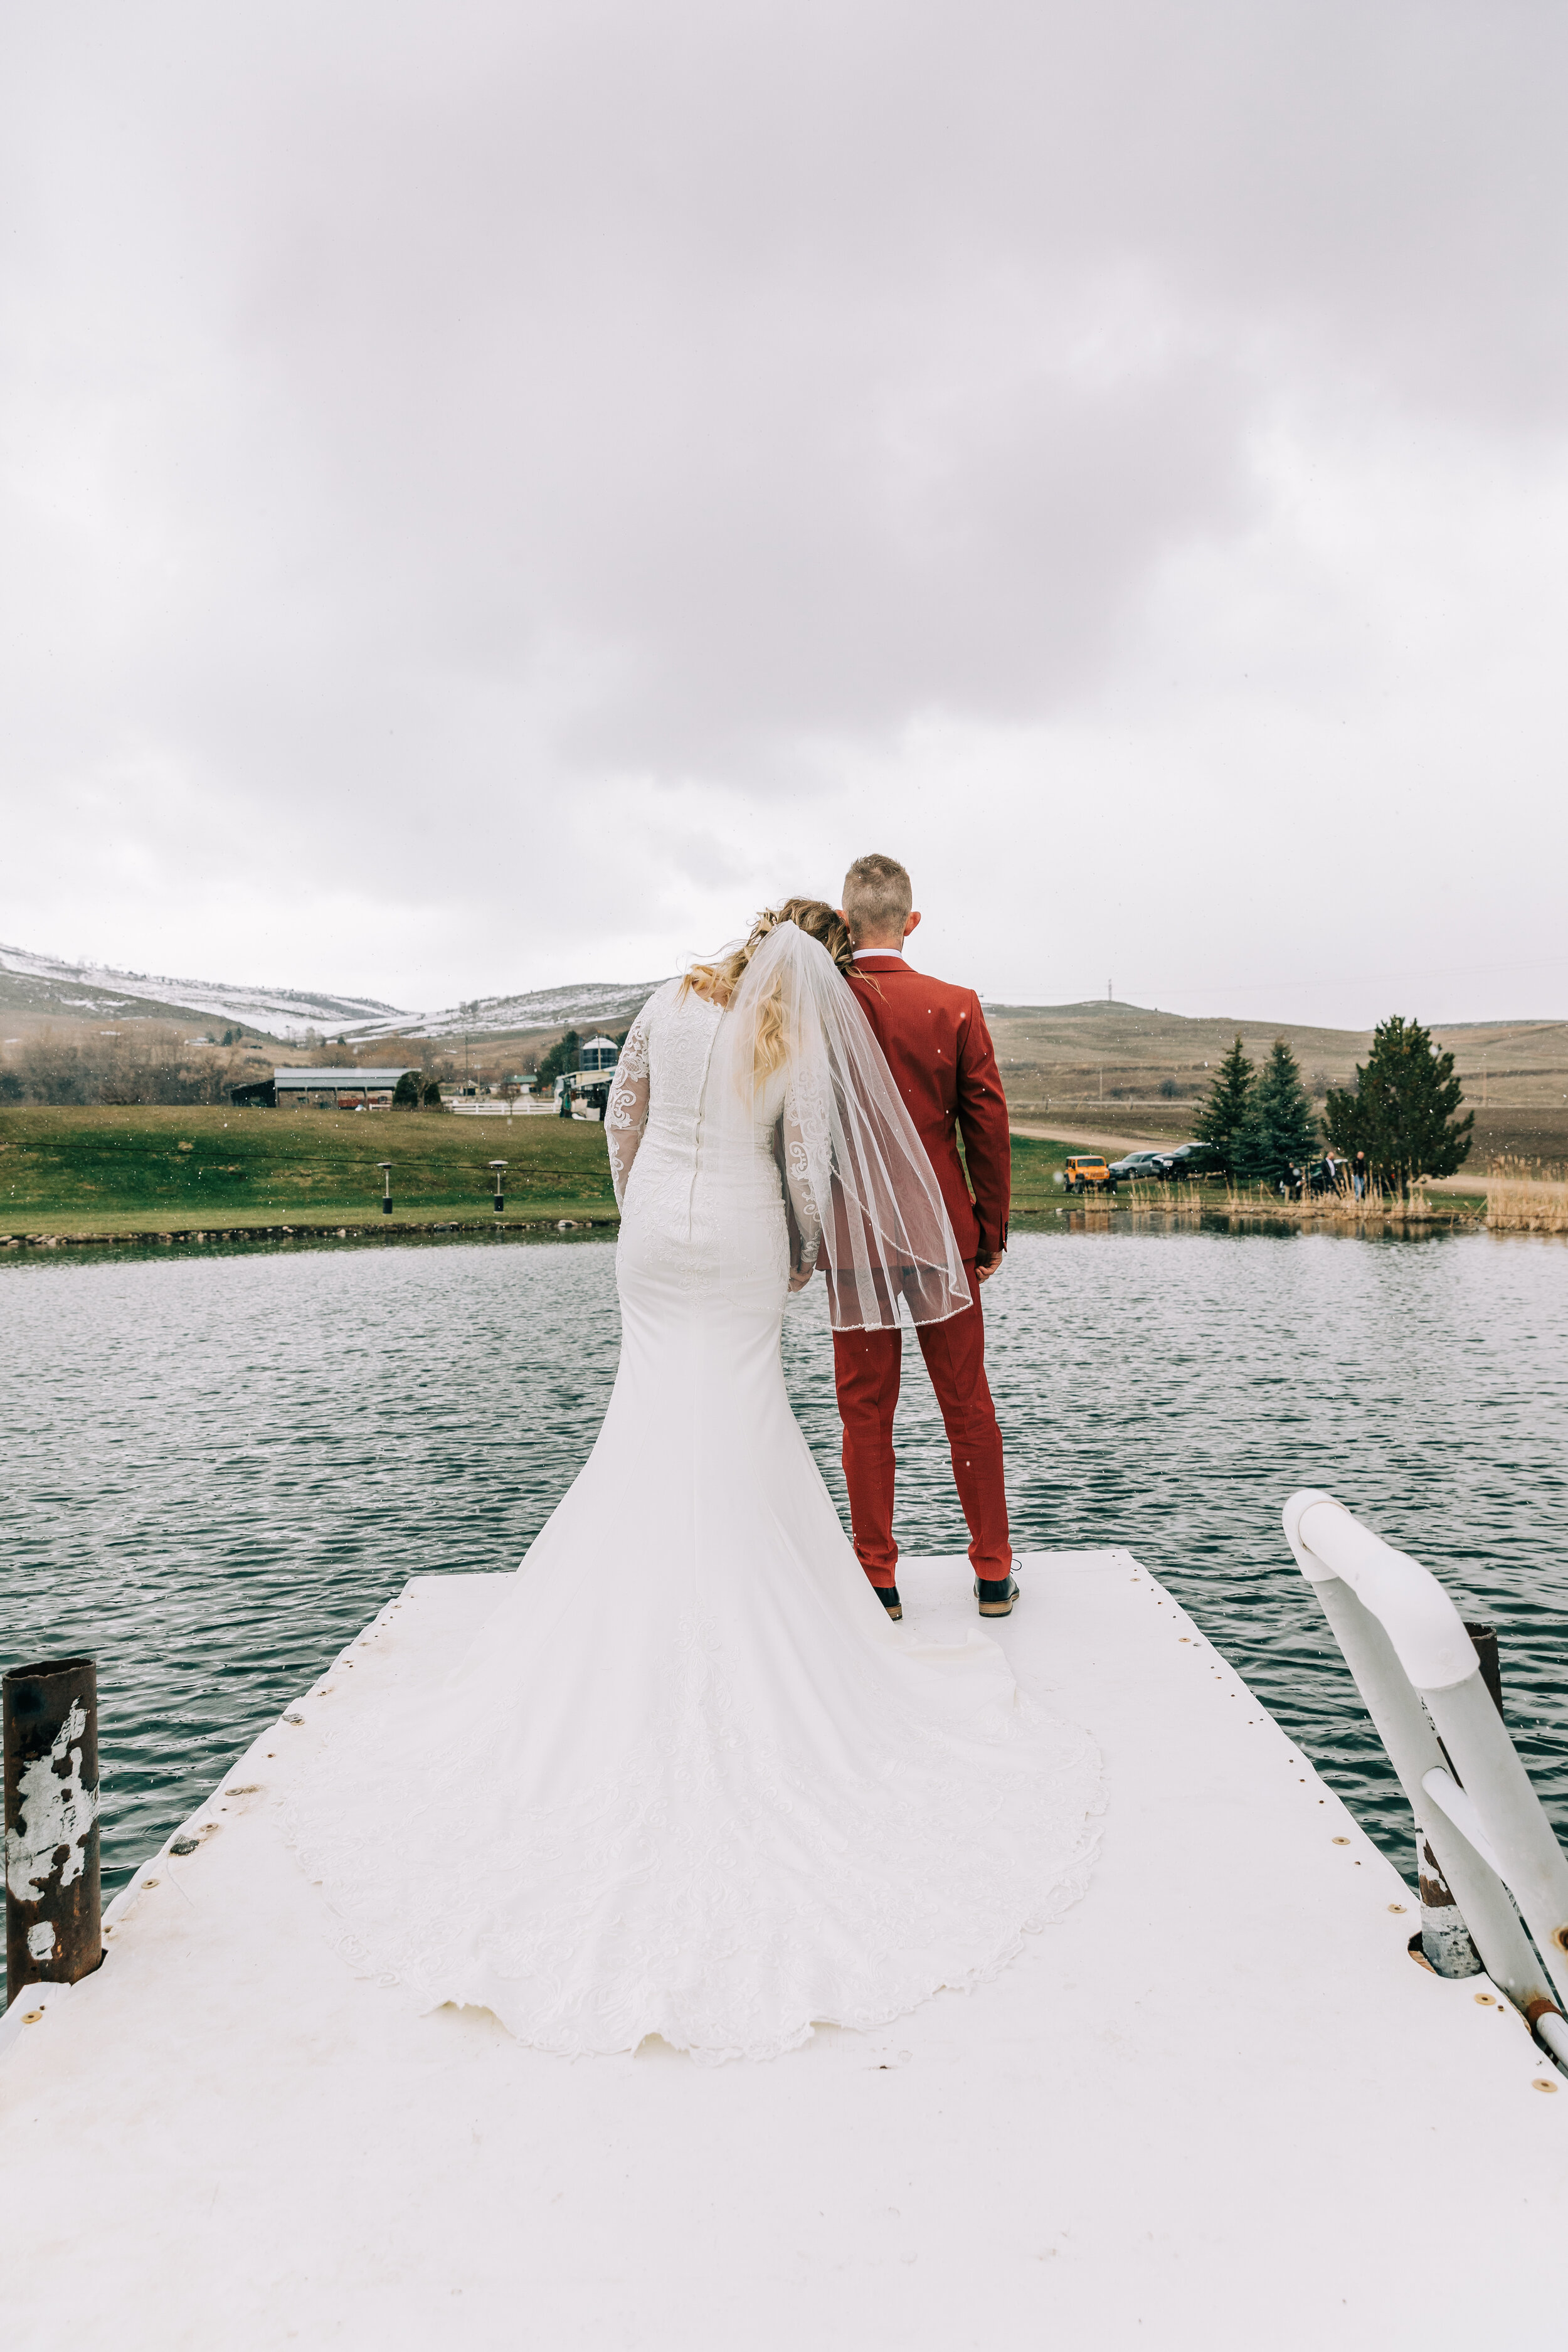  A beautiful couple standing alone looking out onto a beautiful stormy lake in a gorgeous rustic elopement styled photo shoot. Couple pose goals couple goals wedding goals outdoor wedding photo shoot inspiration Preston, Idaho goals professional elop